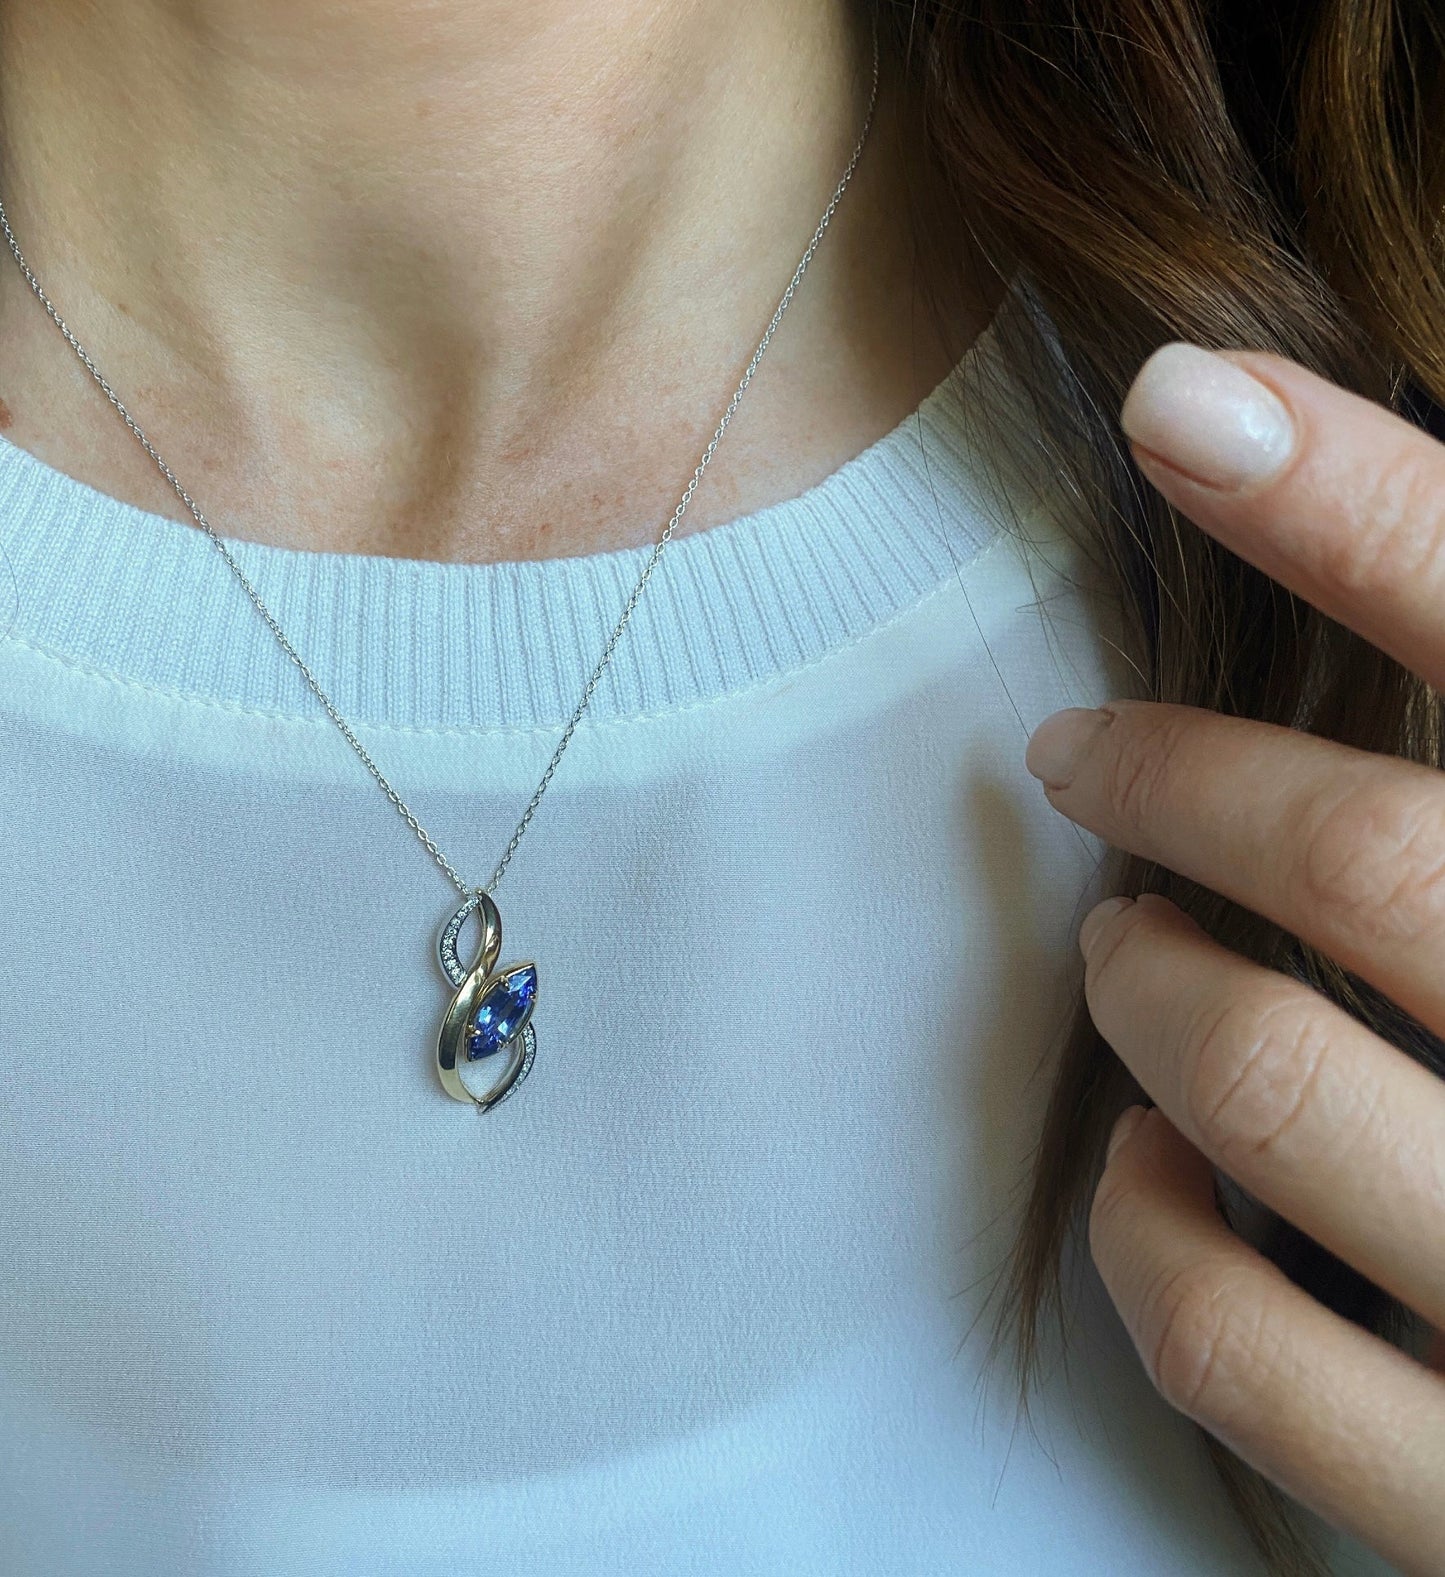 Signature. Duo Pendant with Sapphire and Diamonds